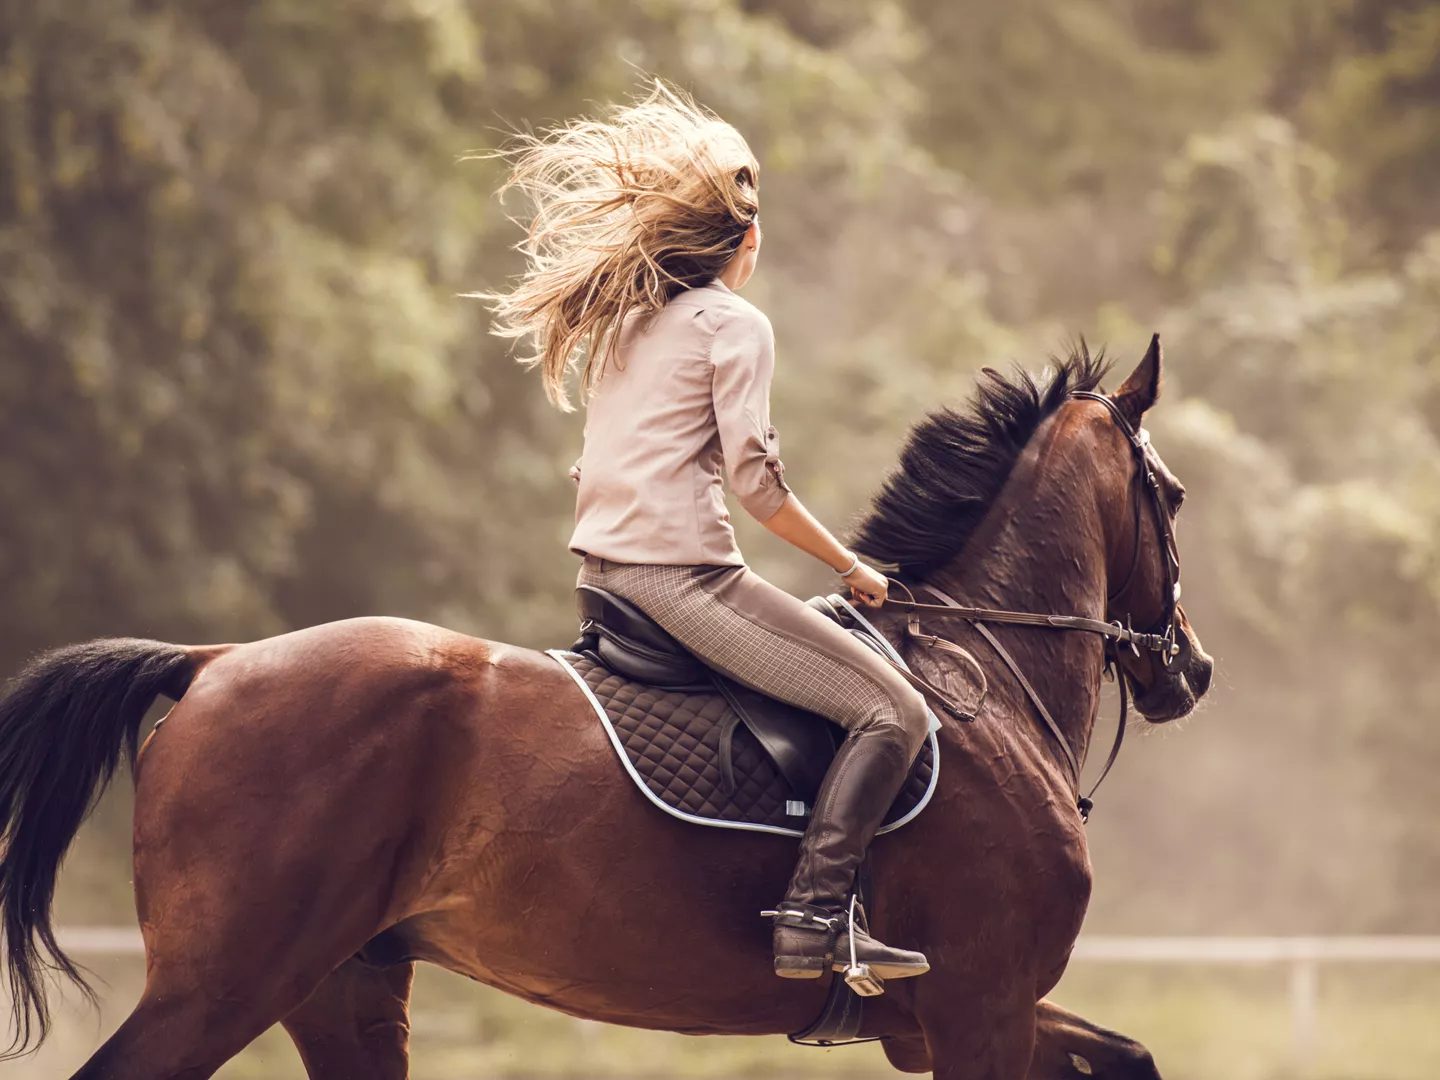 Is Horseback Riding Harmful to Women? Andrew Weil, M.D.